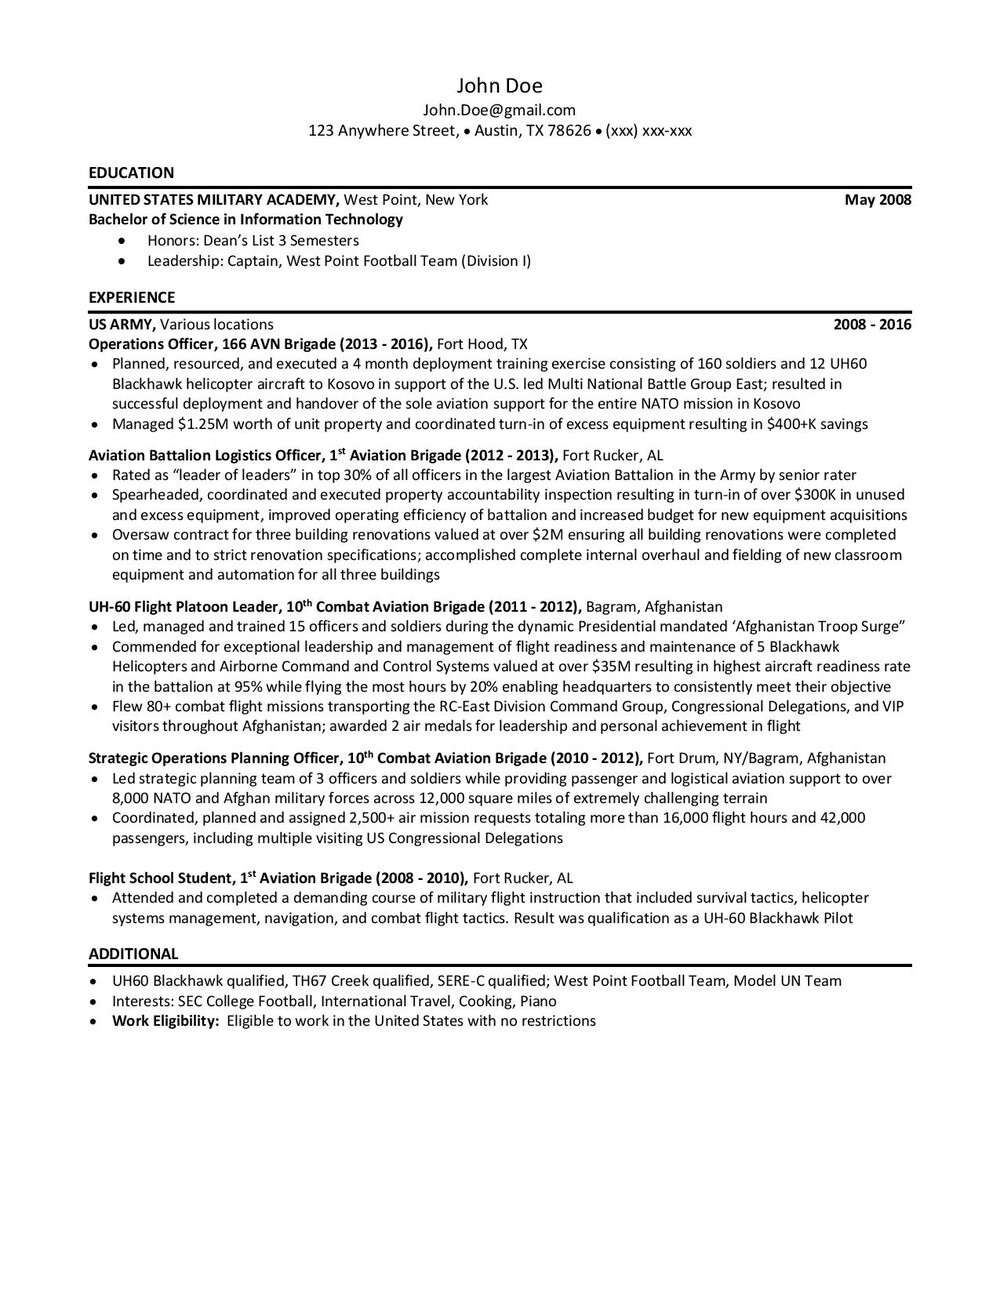 Sample Military to Civilian Transition Resume Military to Civilian Resume Help â Post Military Career Options